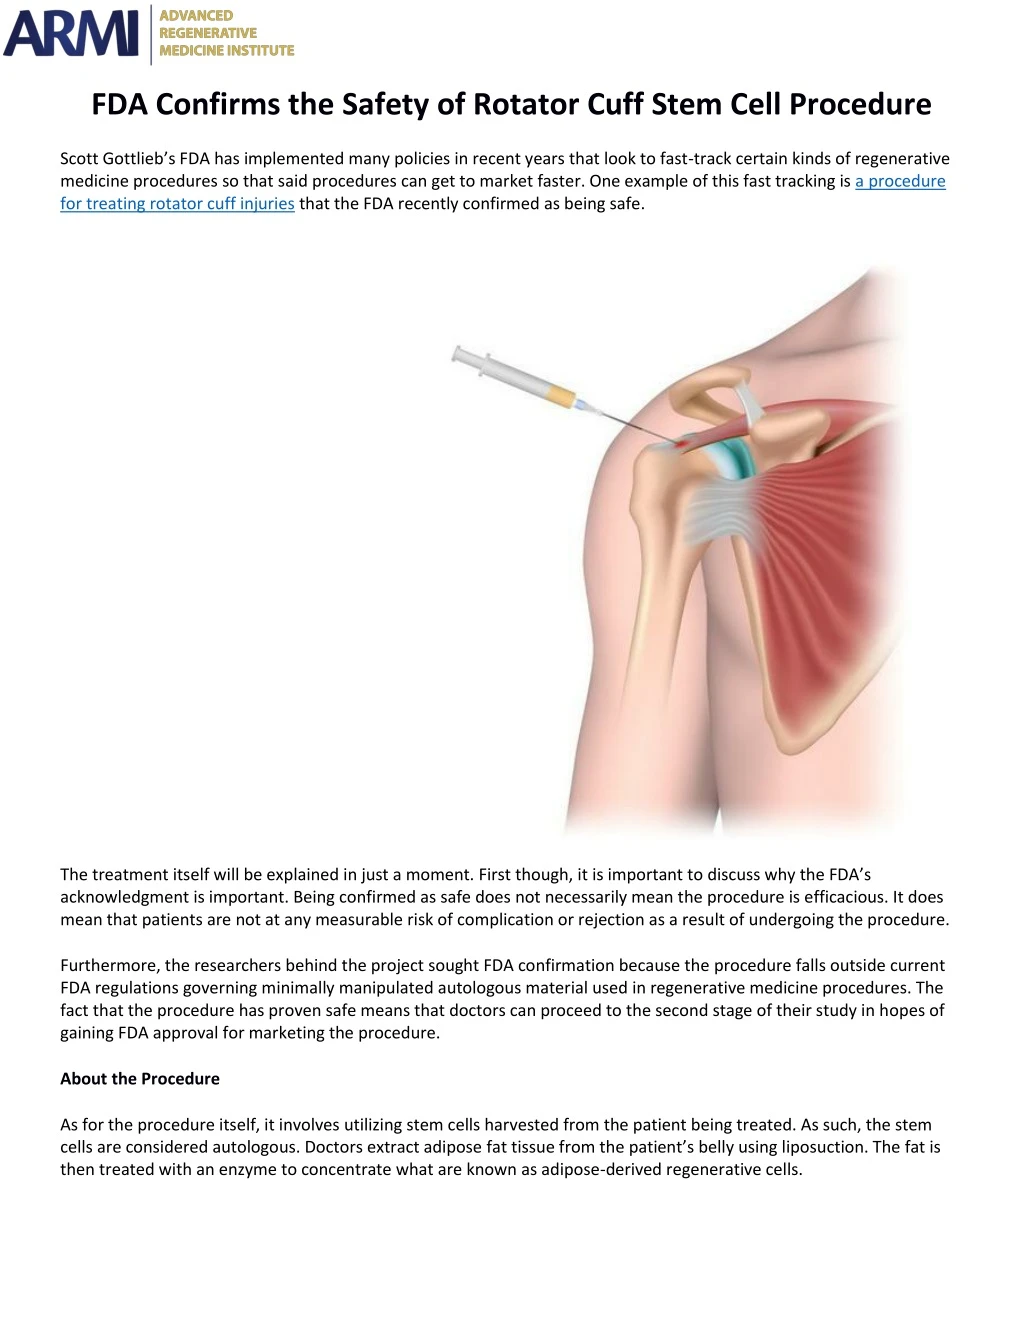 fda confirms the safety of rotator cuff stem cell